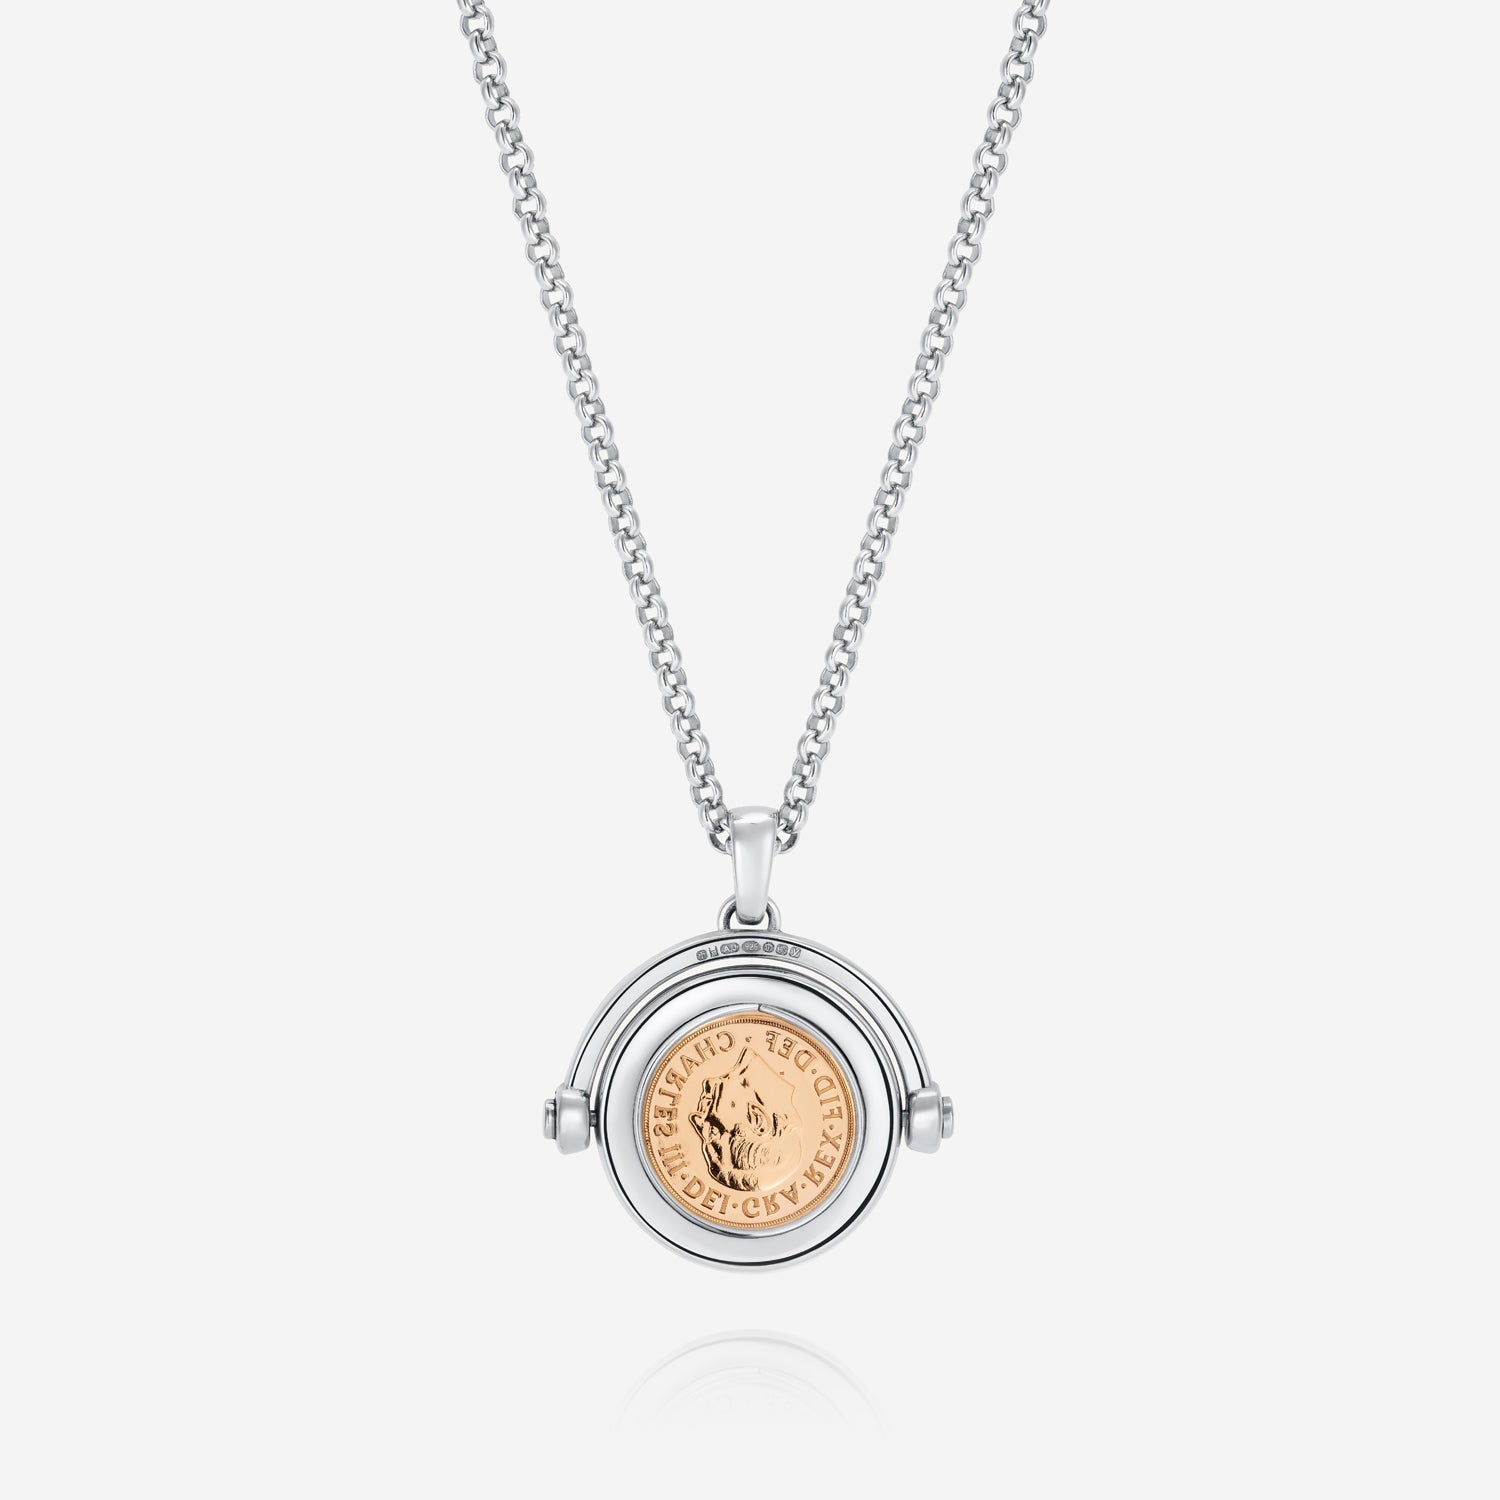 886 Royal Mint Necklaces 886 Quarter Sovereign Spinning Pendant with Chain Sterling Silver